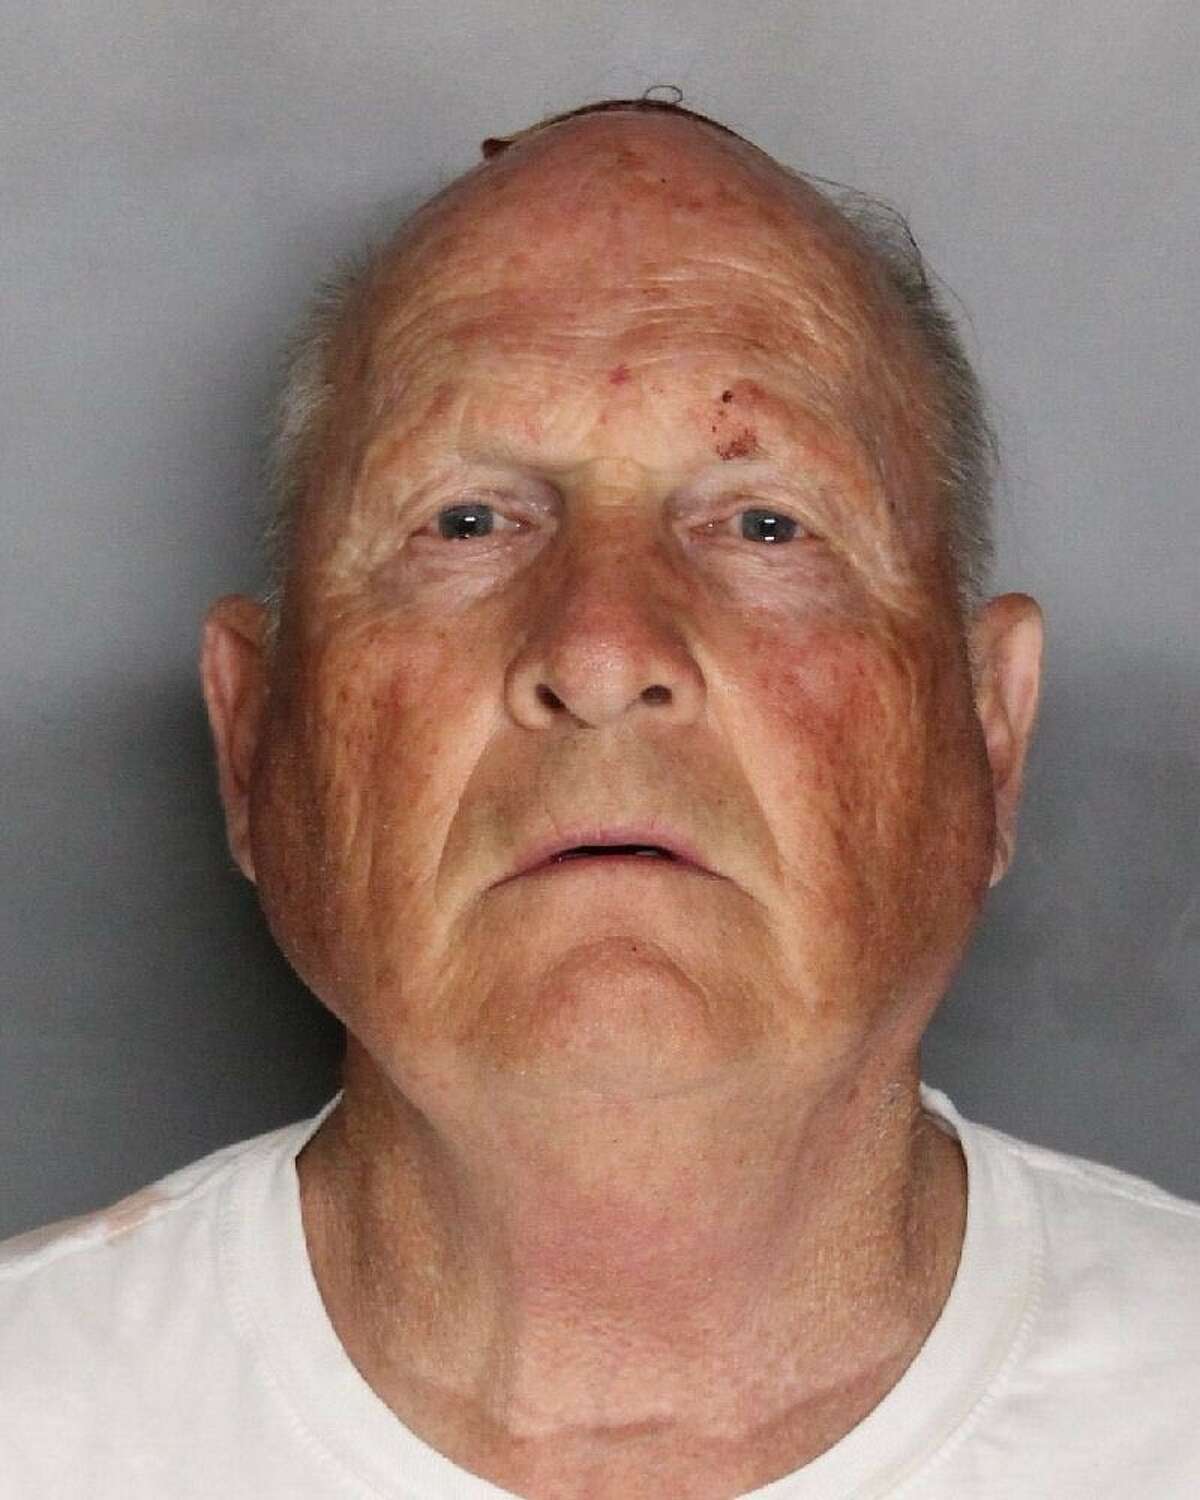 Police arrested Joseph James DeAngelo, 72, in connection with crimes attributed to the East Area Rapist, over 30 years since he allegedly committed 12 murders and 45 rapes from 1976 to 1986.